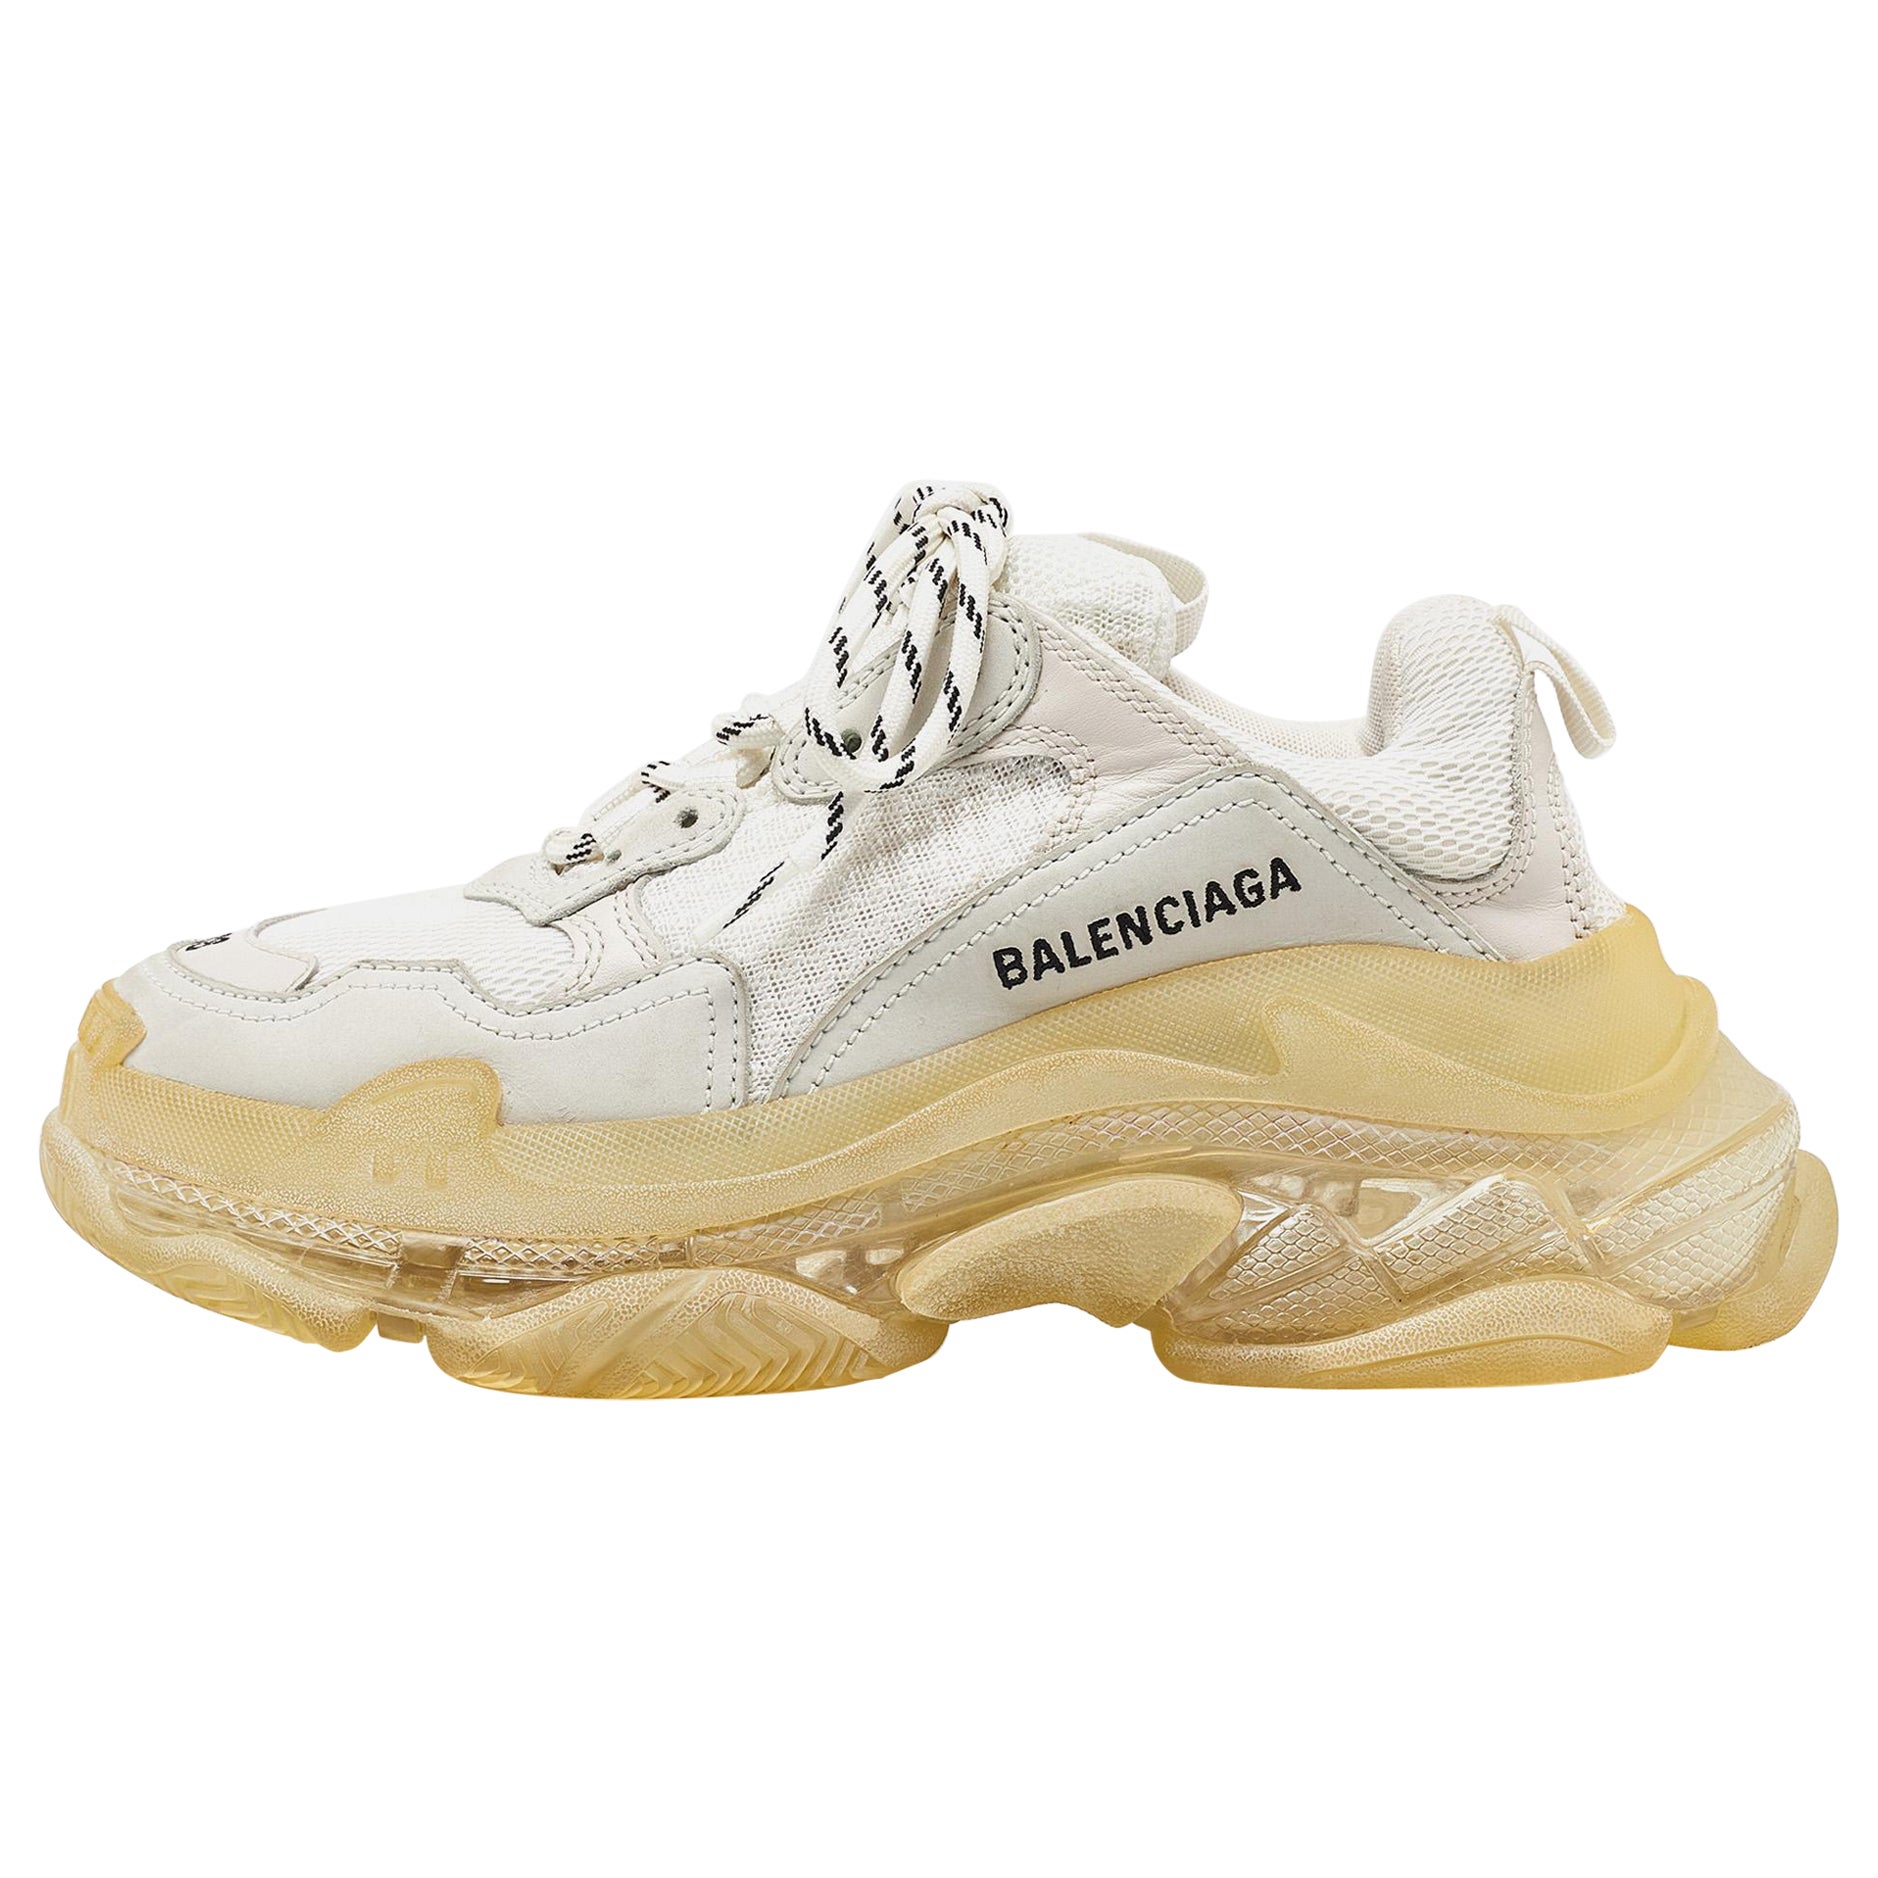 Do Balenciaga shoes have tags on their tongues?